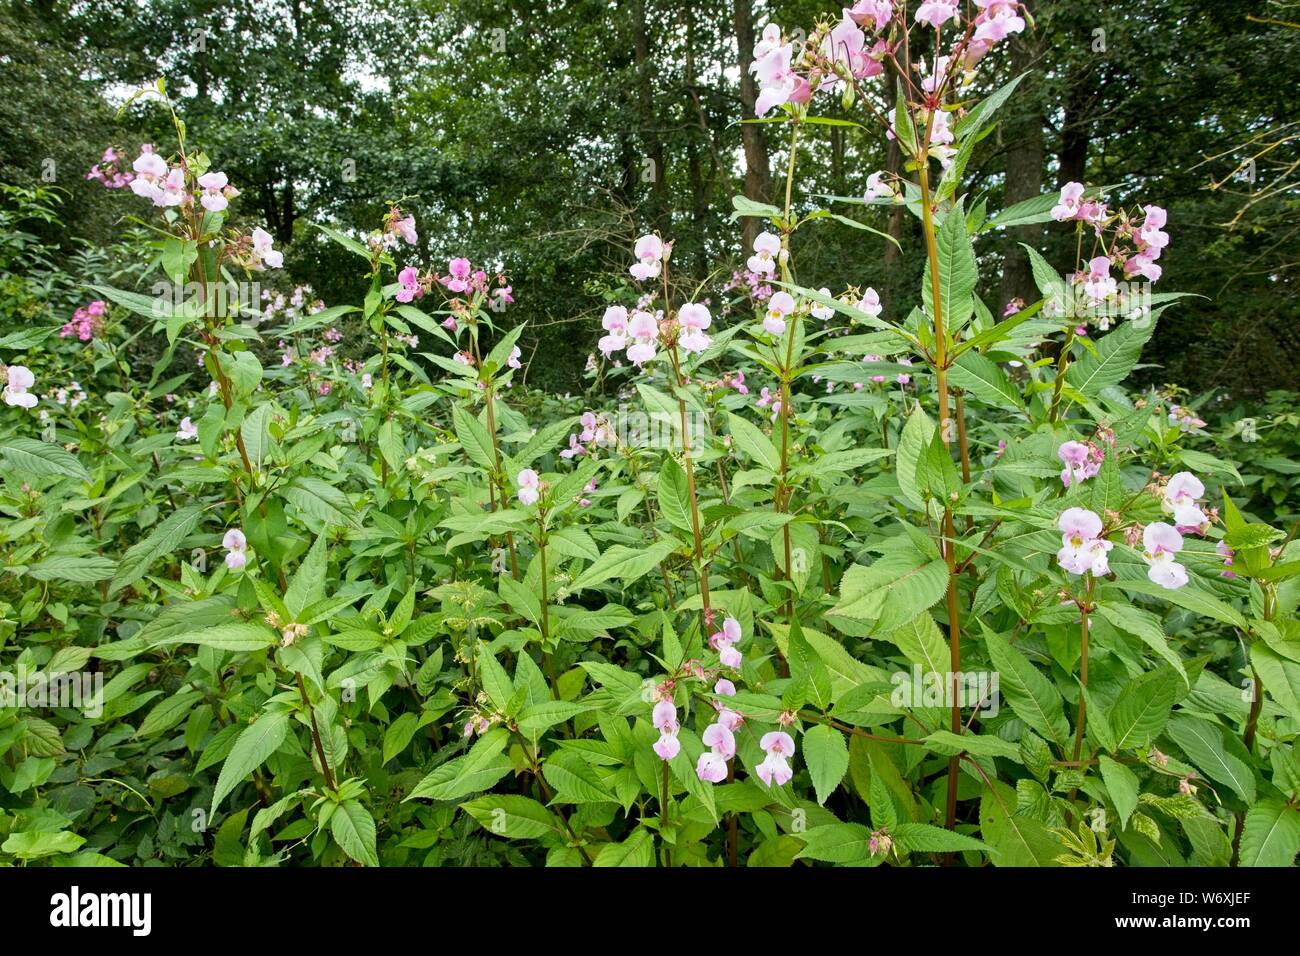 Himalayan Balsam (Impatiens glandulifera) a non native invasive plant species,East Sussex,Uk Stock Photo